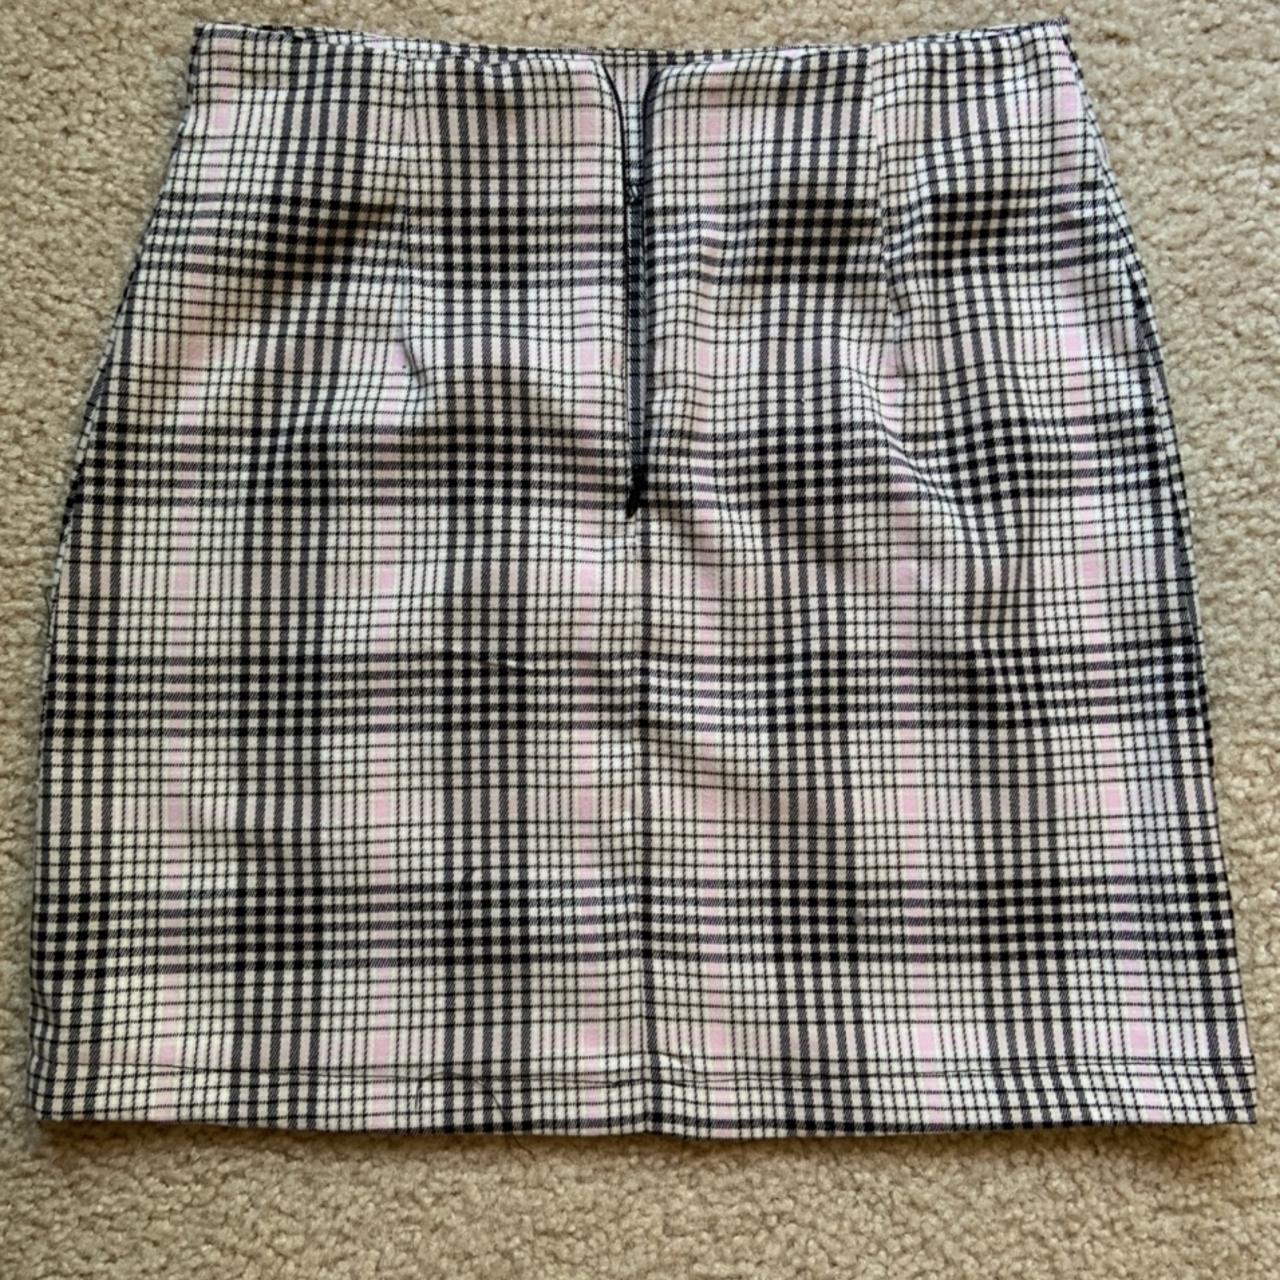 wild fable pink plaid skirt purchased for... - Depop